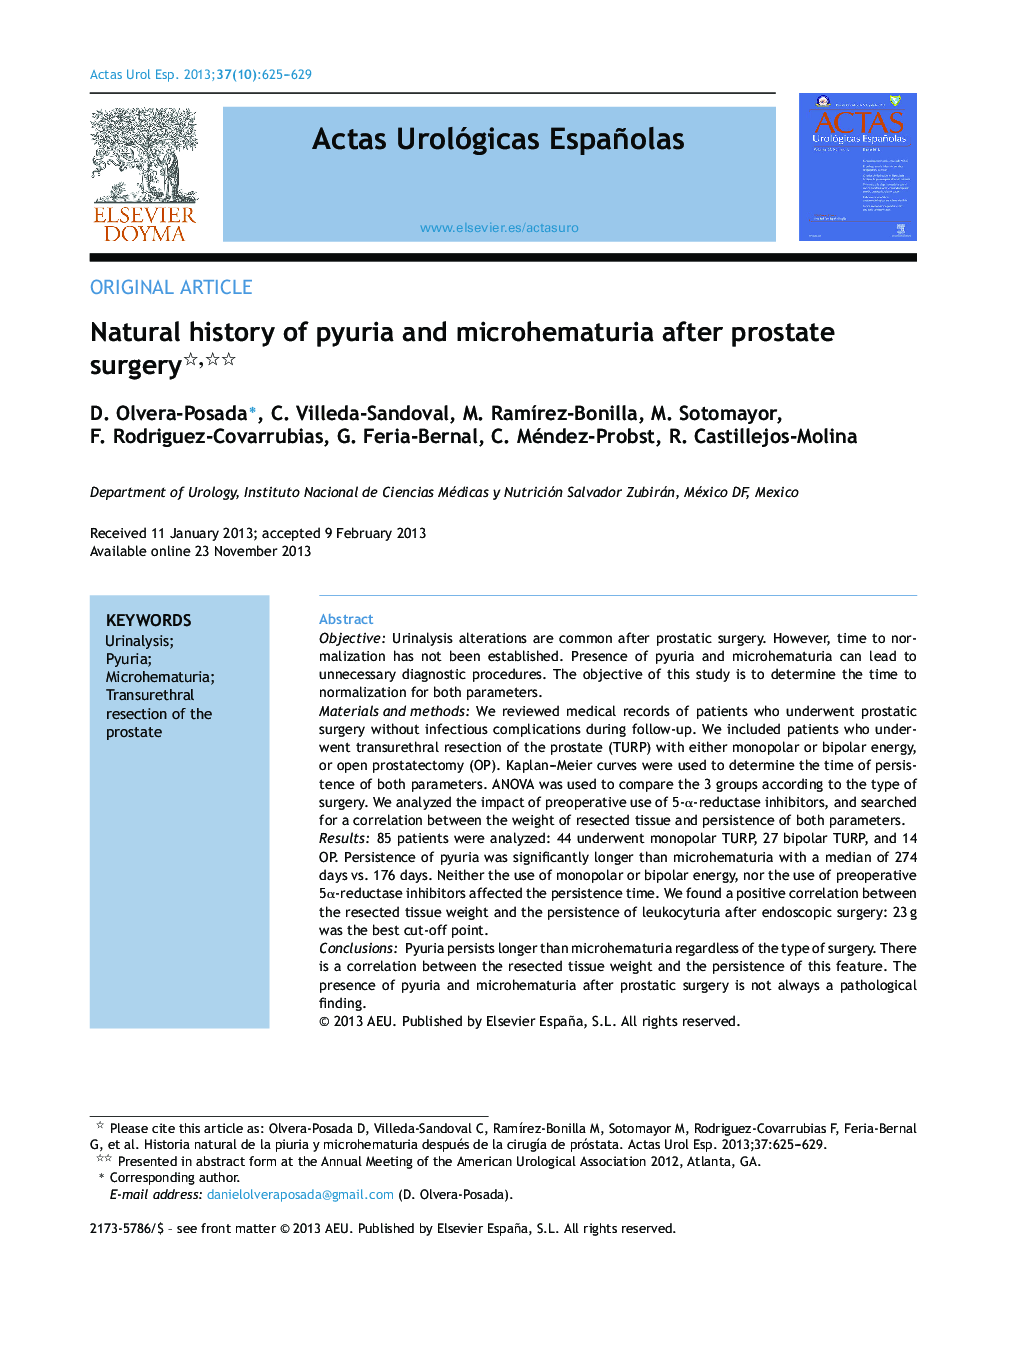 Natural history of pyuria and microhematuria after prostate surgery 